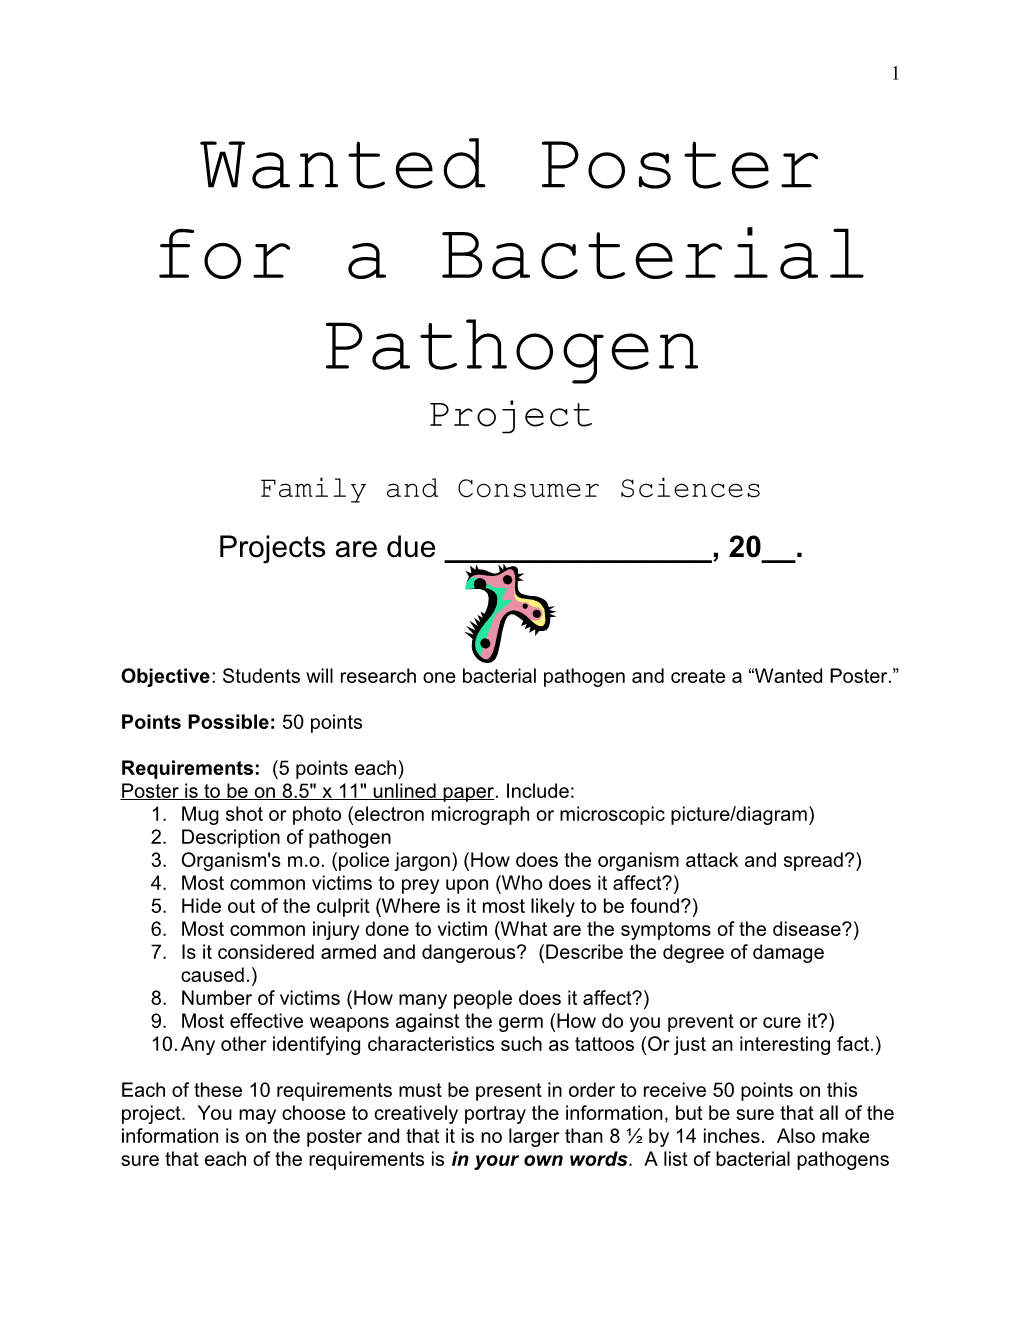 Wanted Poster for a Bacterial Pathogen